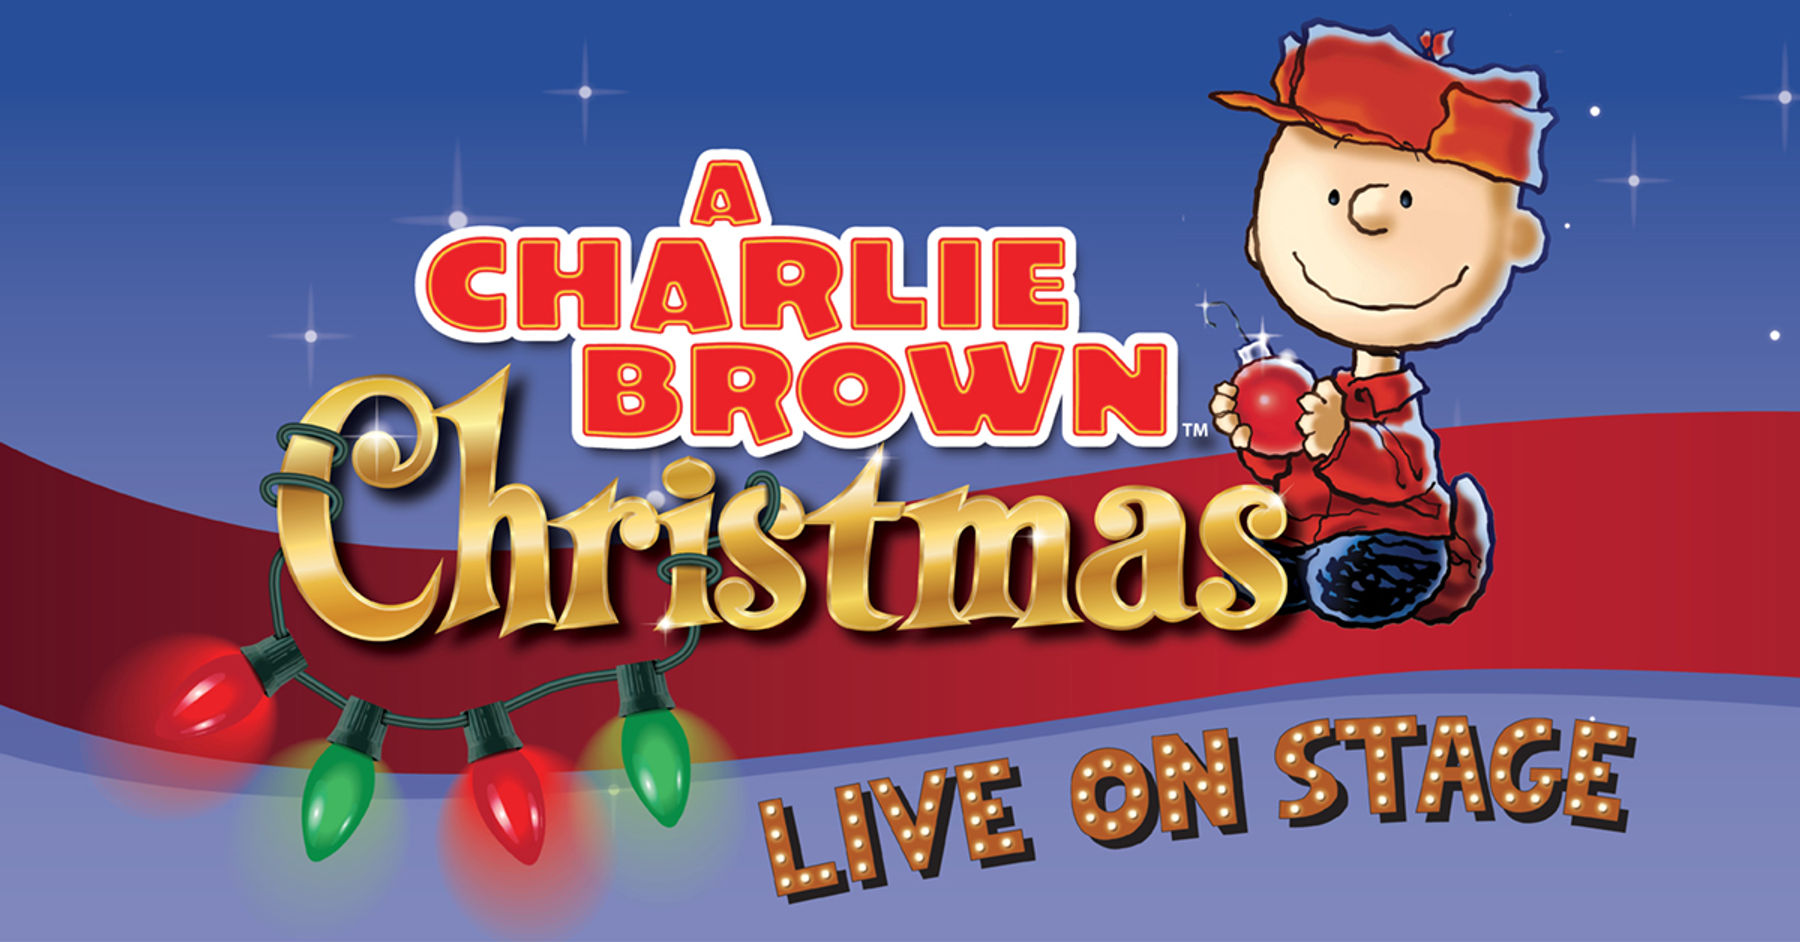 A Charlie Brown Christmas Live On Stage Downtown Nashville